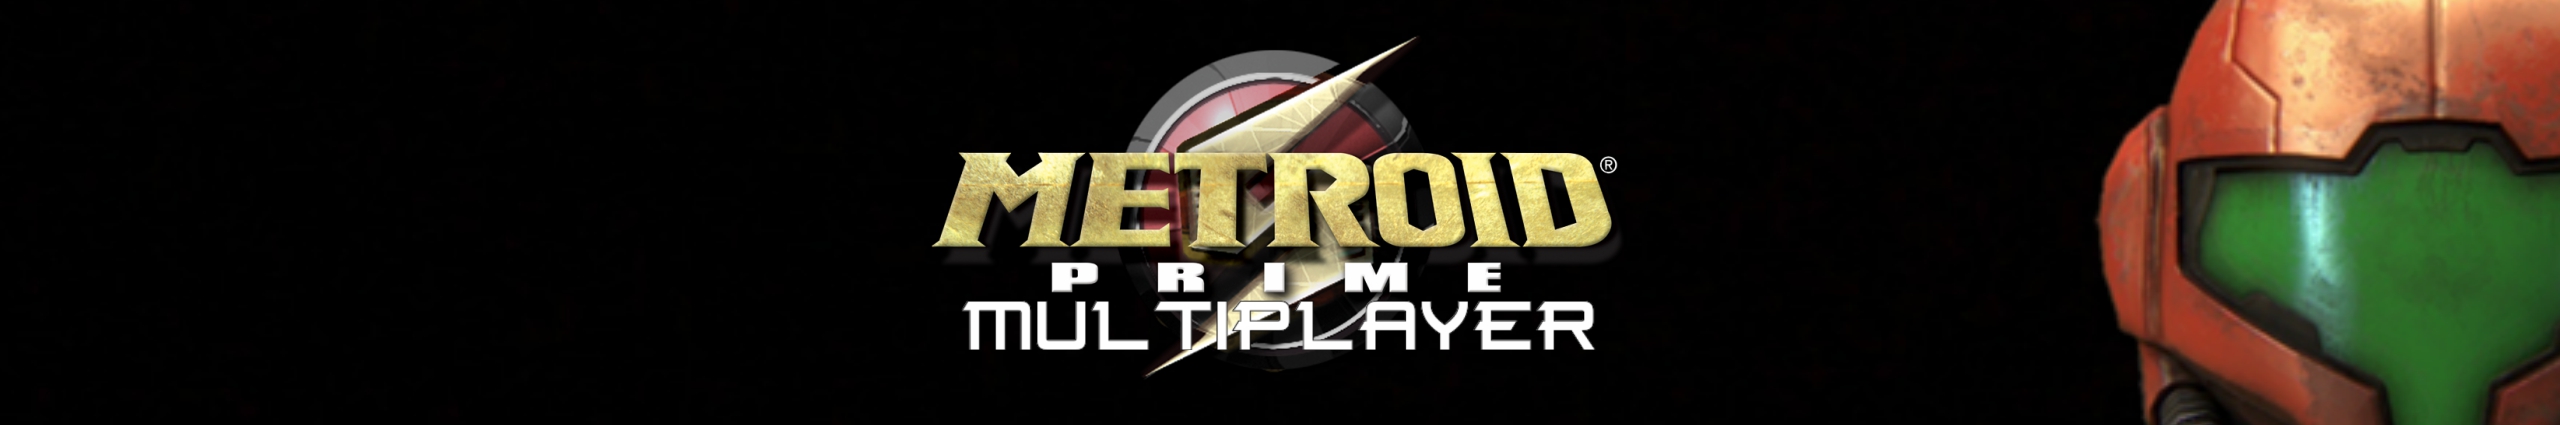 METROID Prime: Multiplayer [FANMADE]